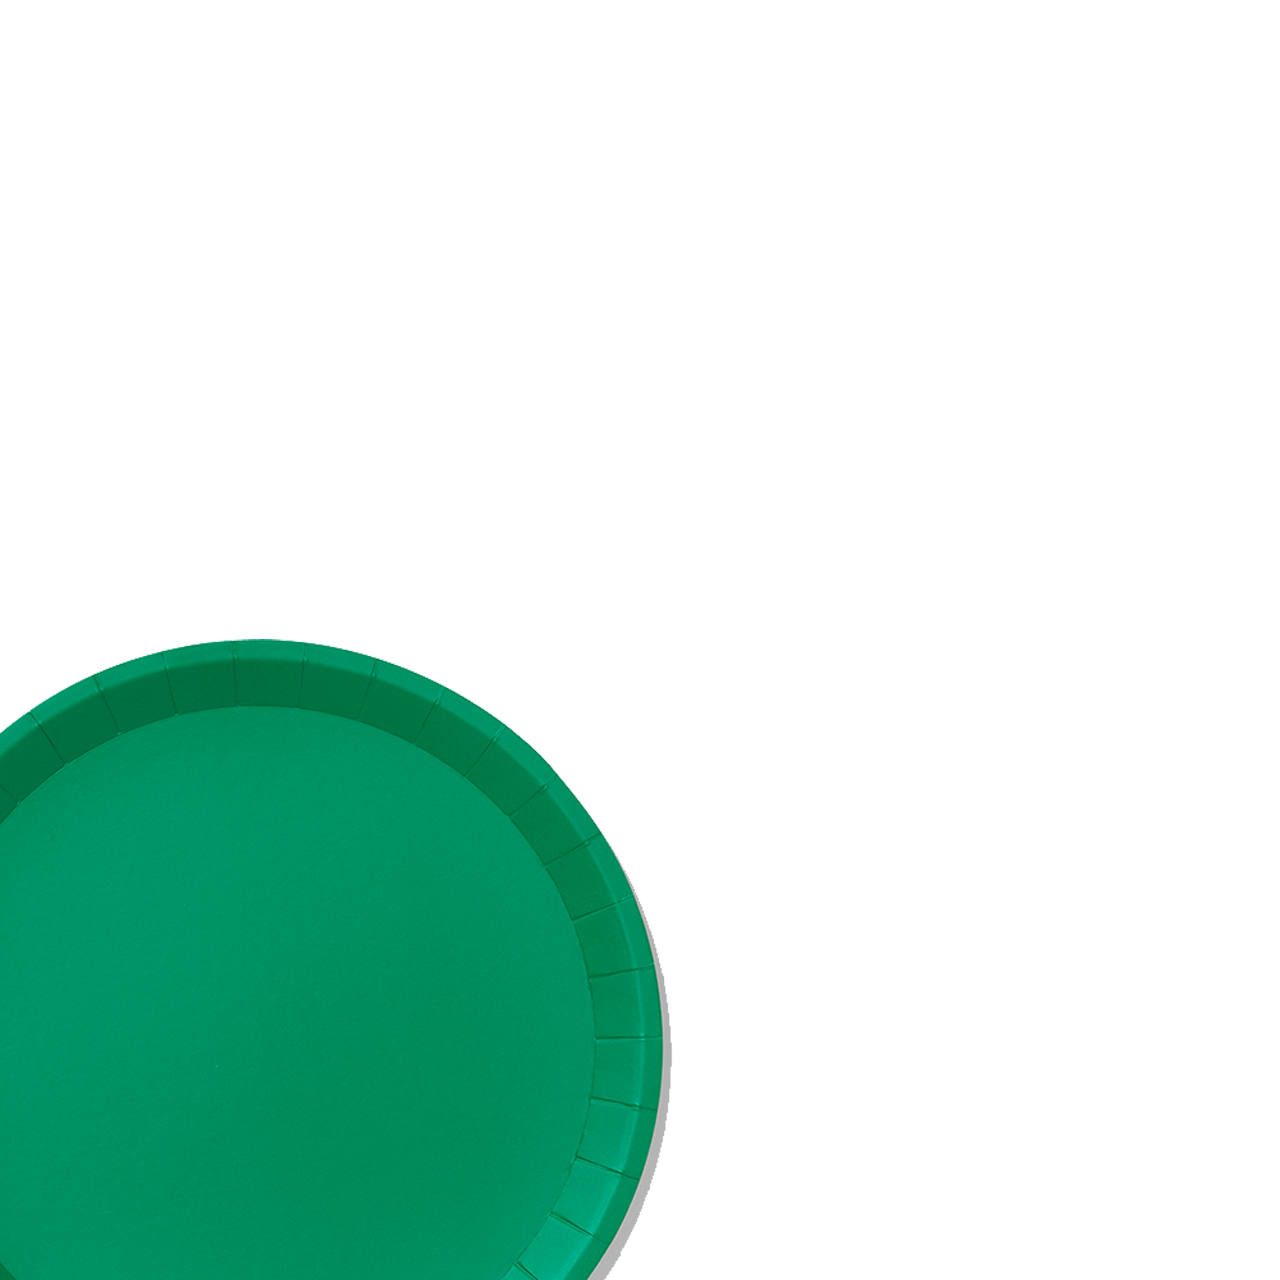 Green Classic Large Plates